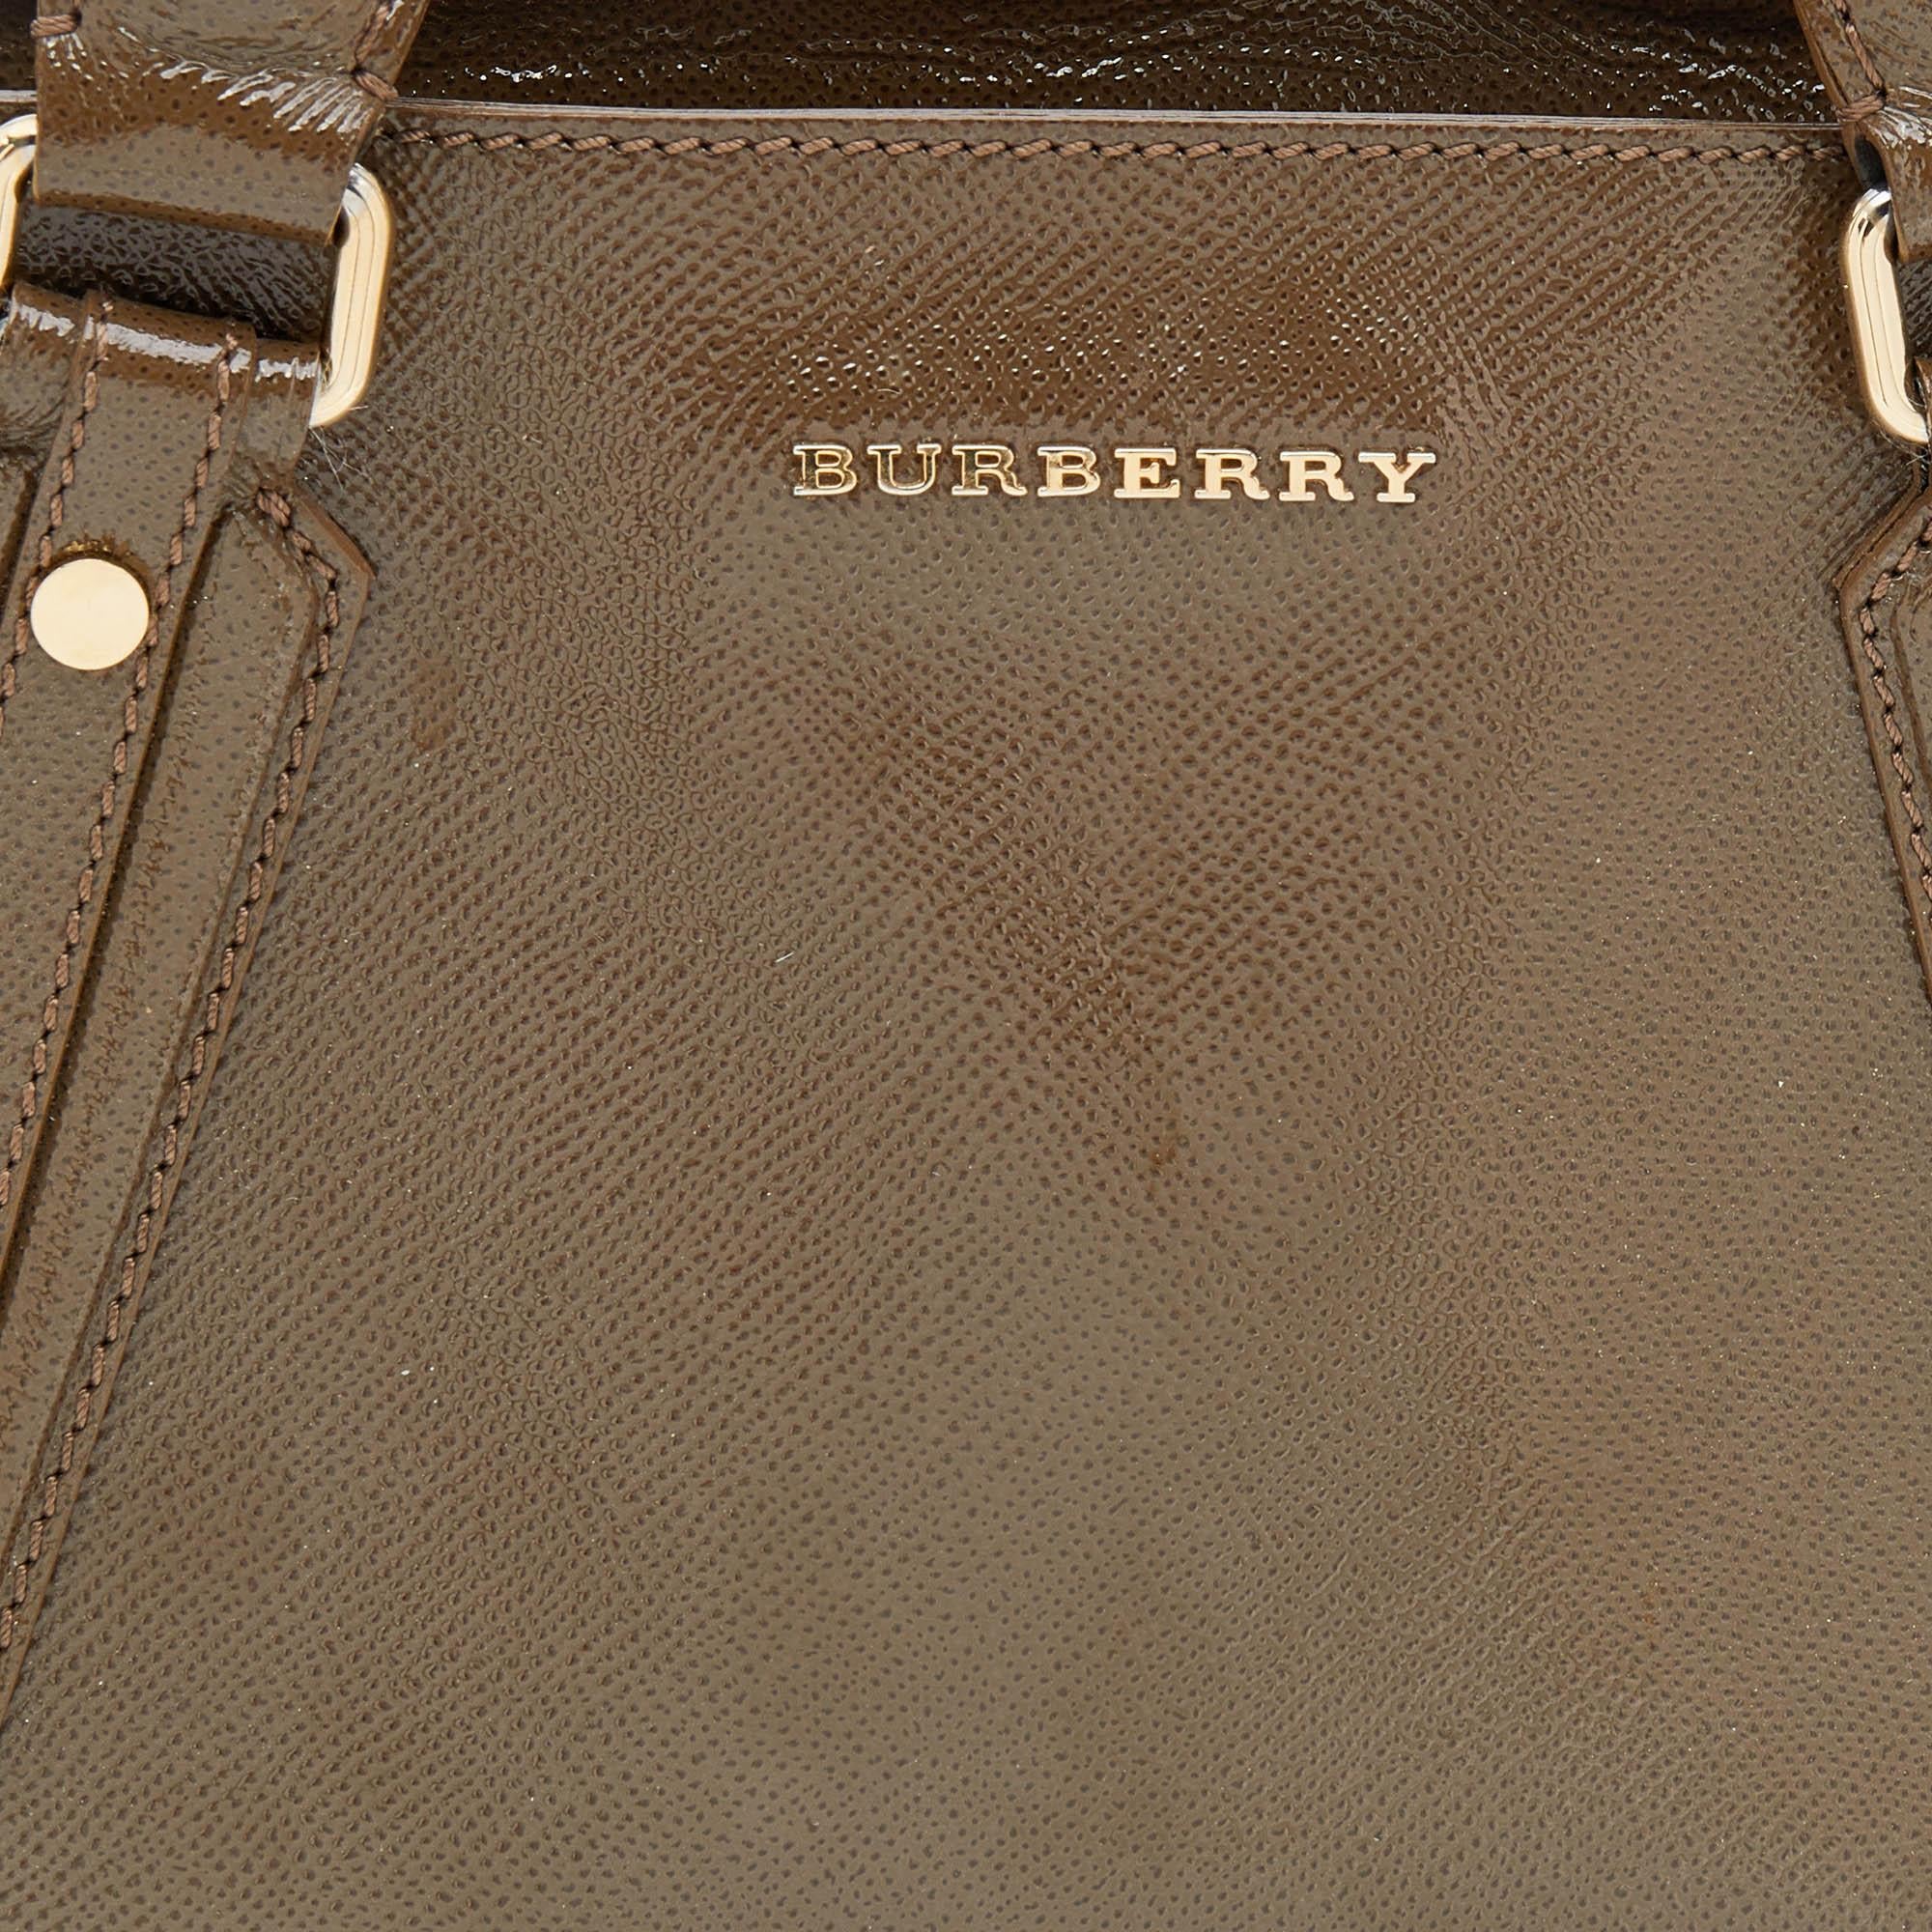 Burberry Brown Patent Leather Somerford Convertible Tote For Sale 4